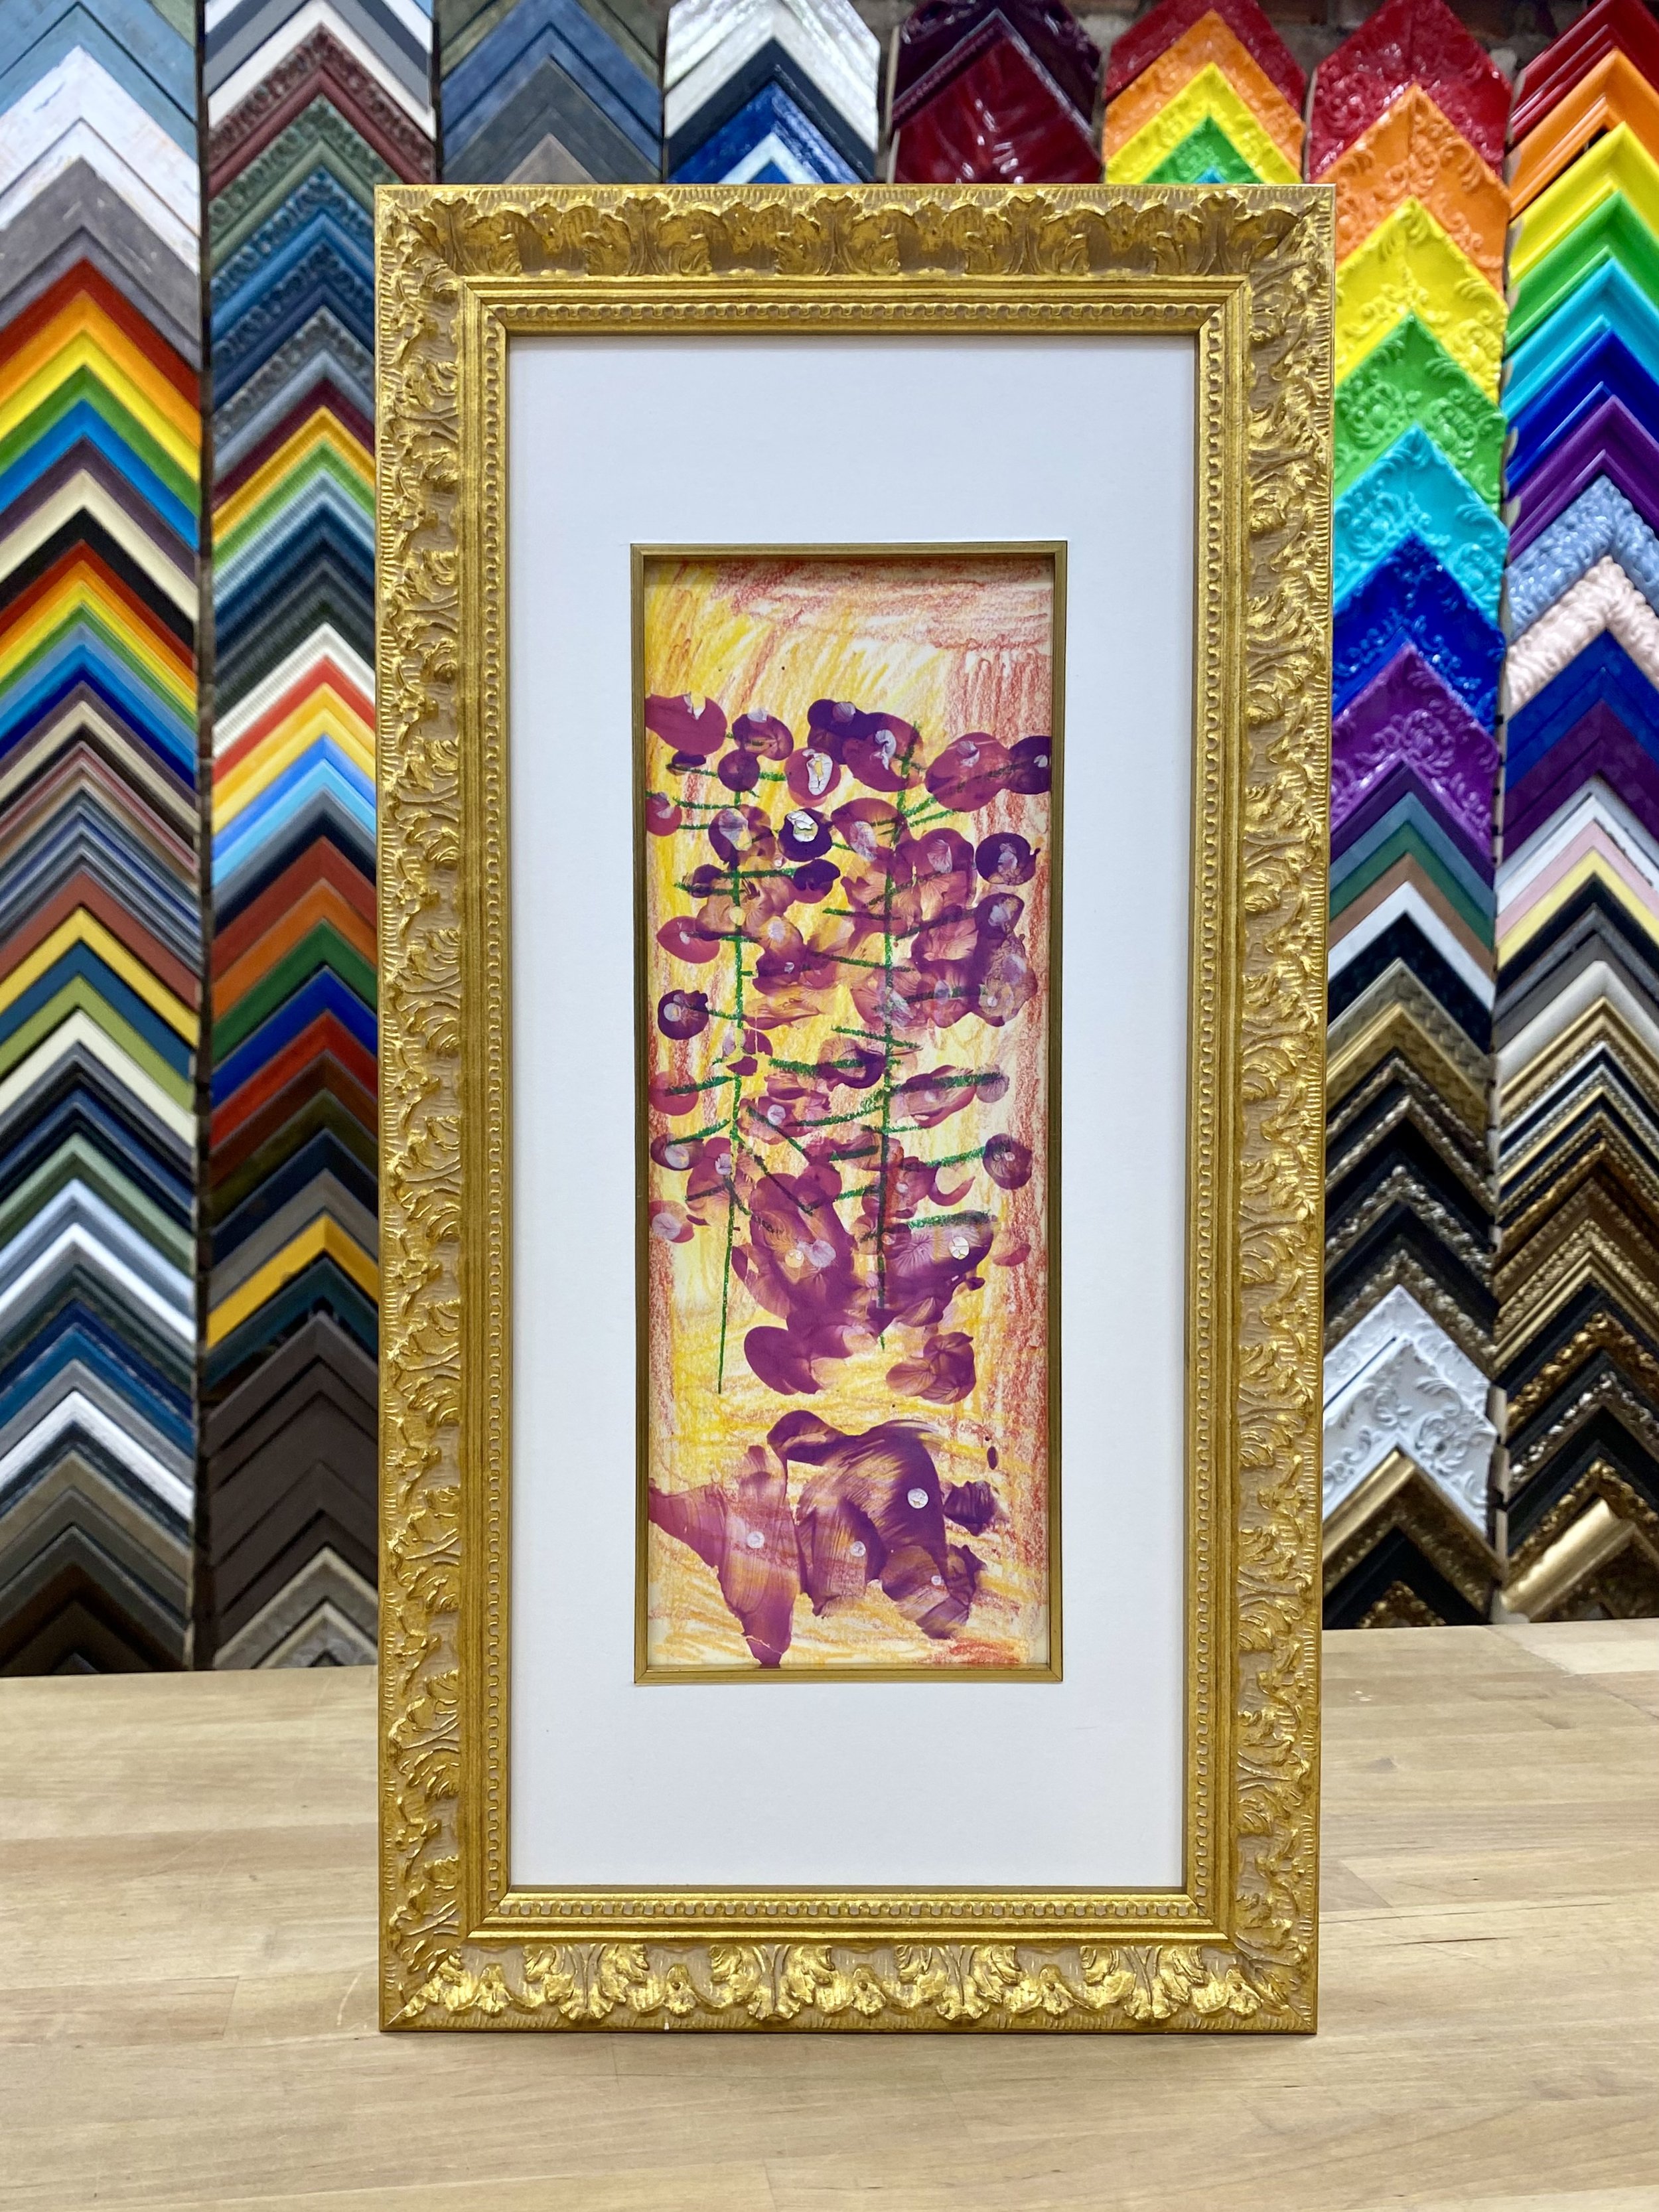   Do you have children’s artwork that is loved, cherished, and yet sitting in a drawer or folder? Have you considered custom framing these treasured pieces? Now is the time!     You can go fancy, with intricate gold leaf , mats and fillets (the tiny 